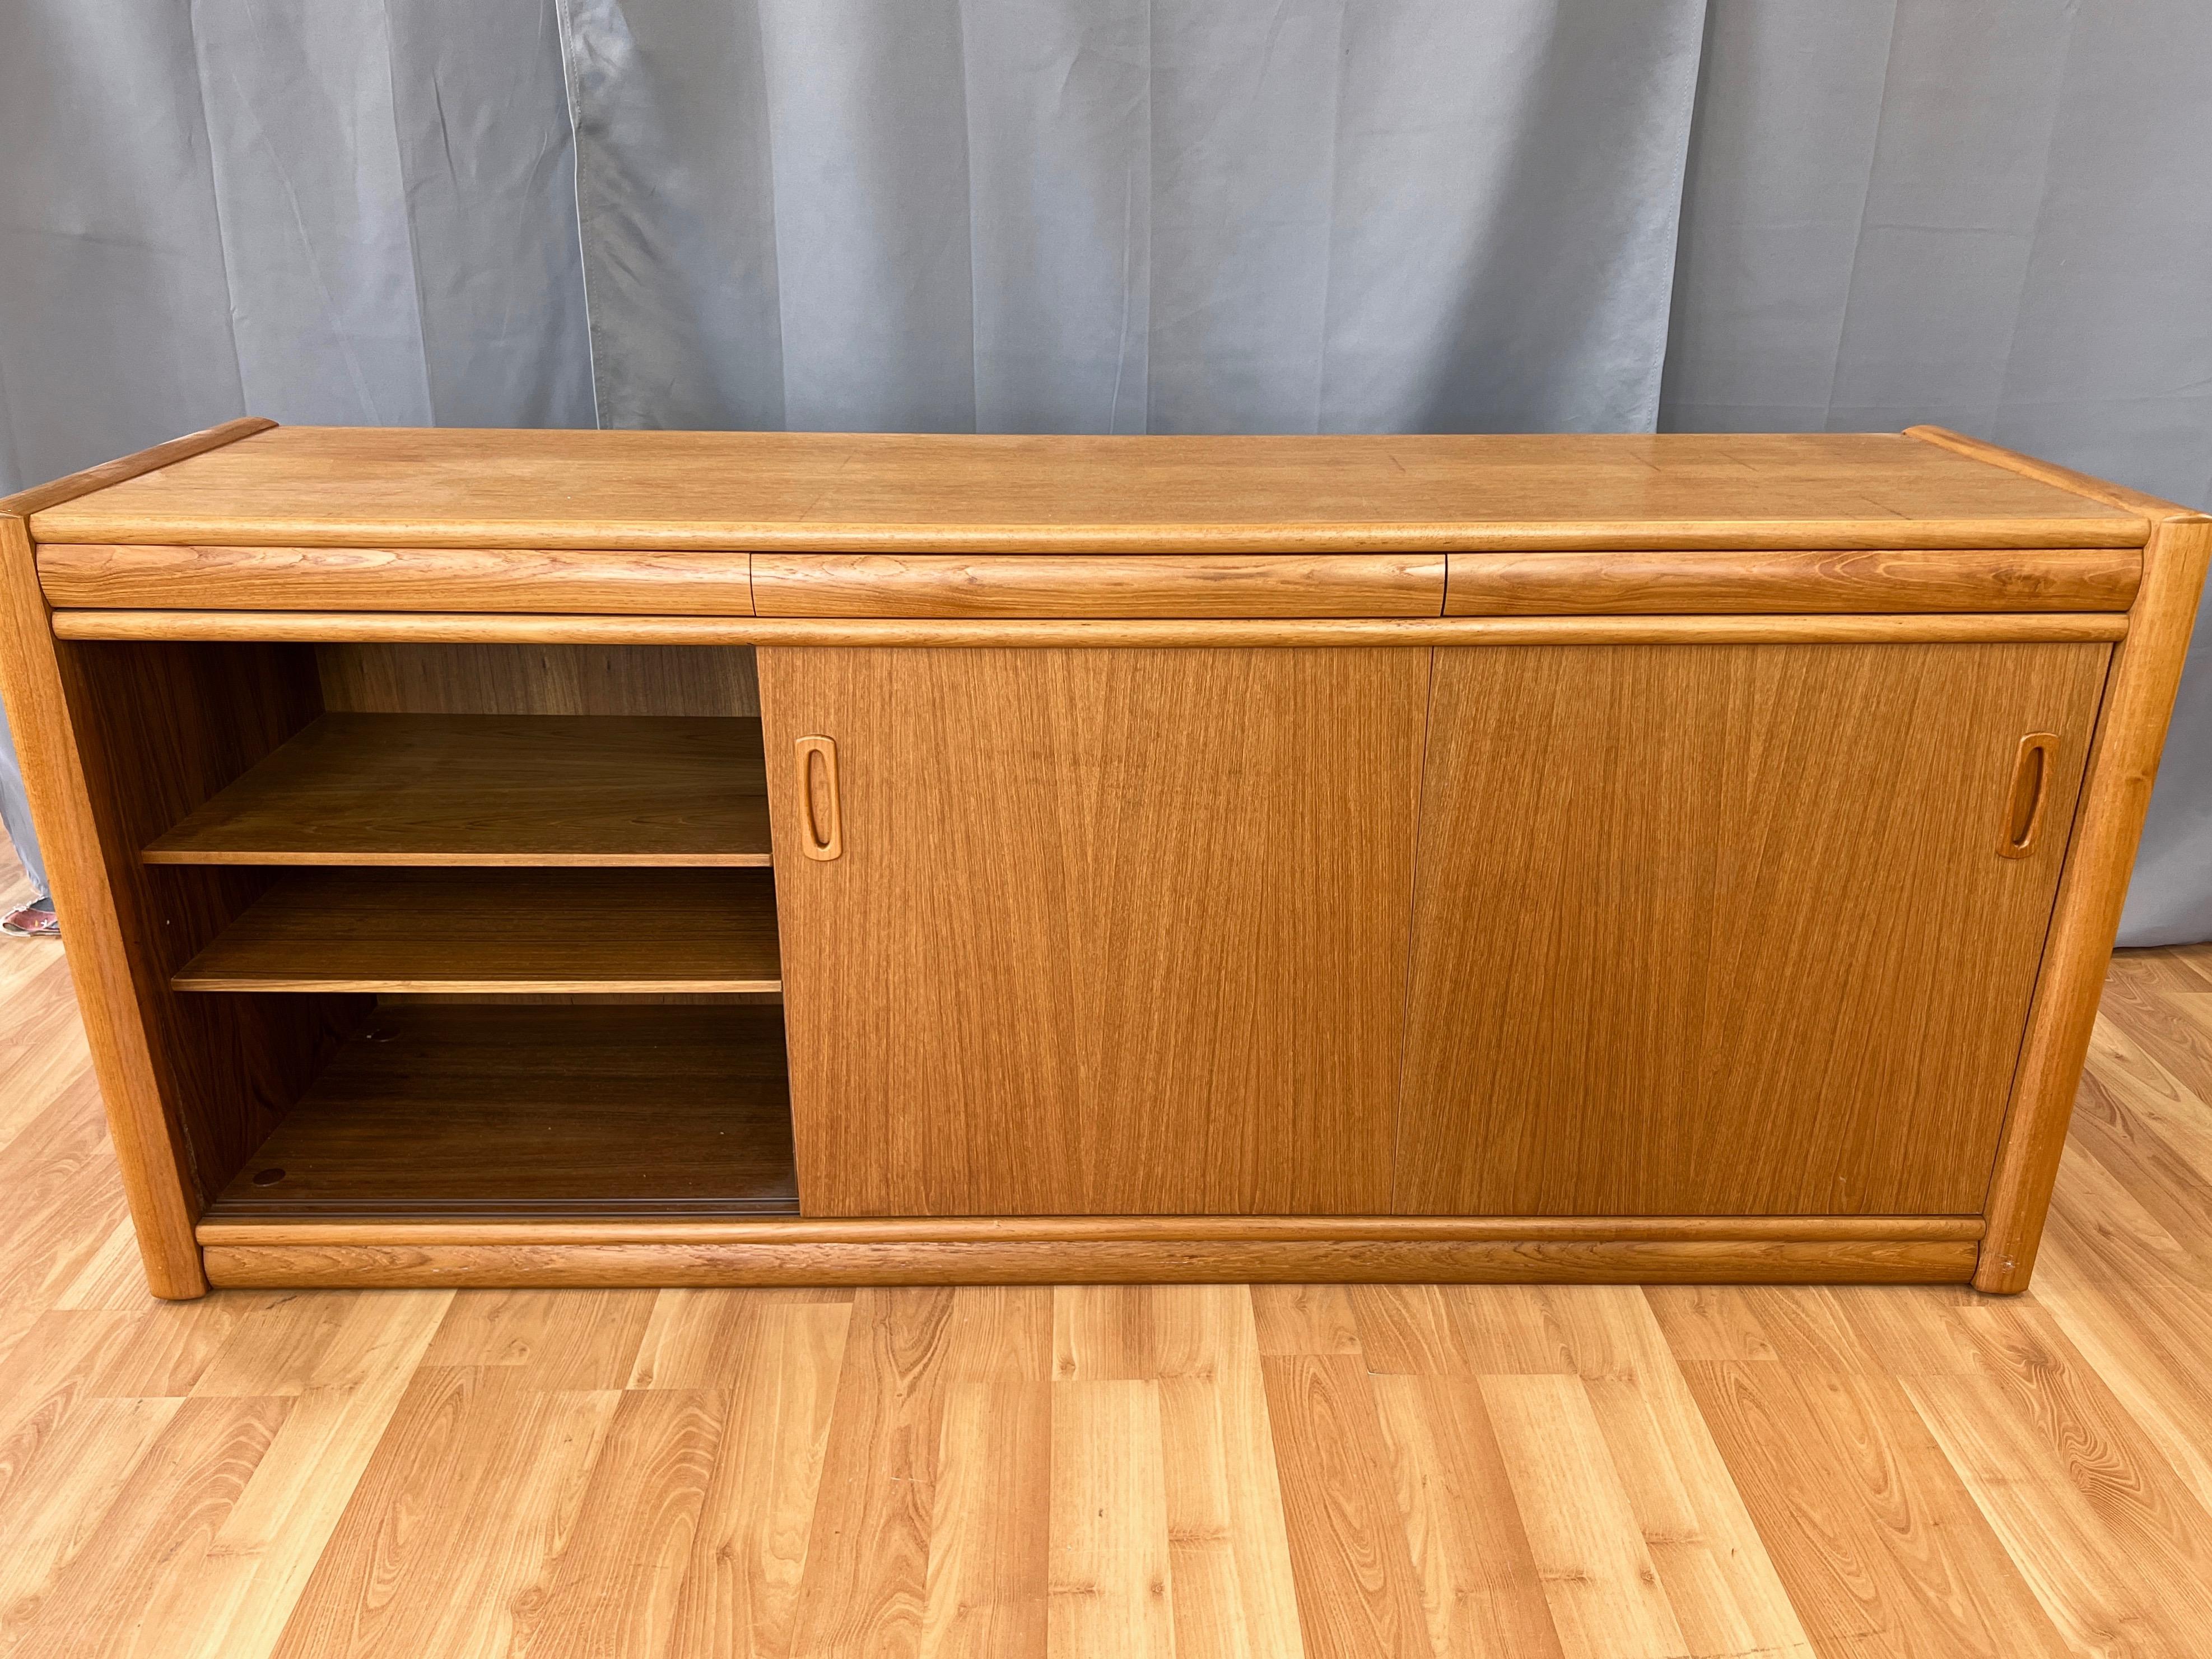 Late 20th Century Danish Modern Long Teak Sideboard with Three Doors and Three Drawers, 1970s For Sale